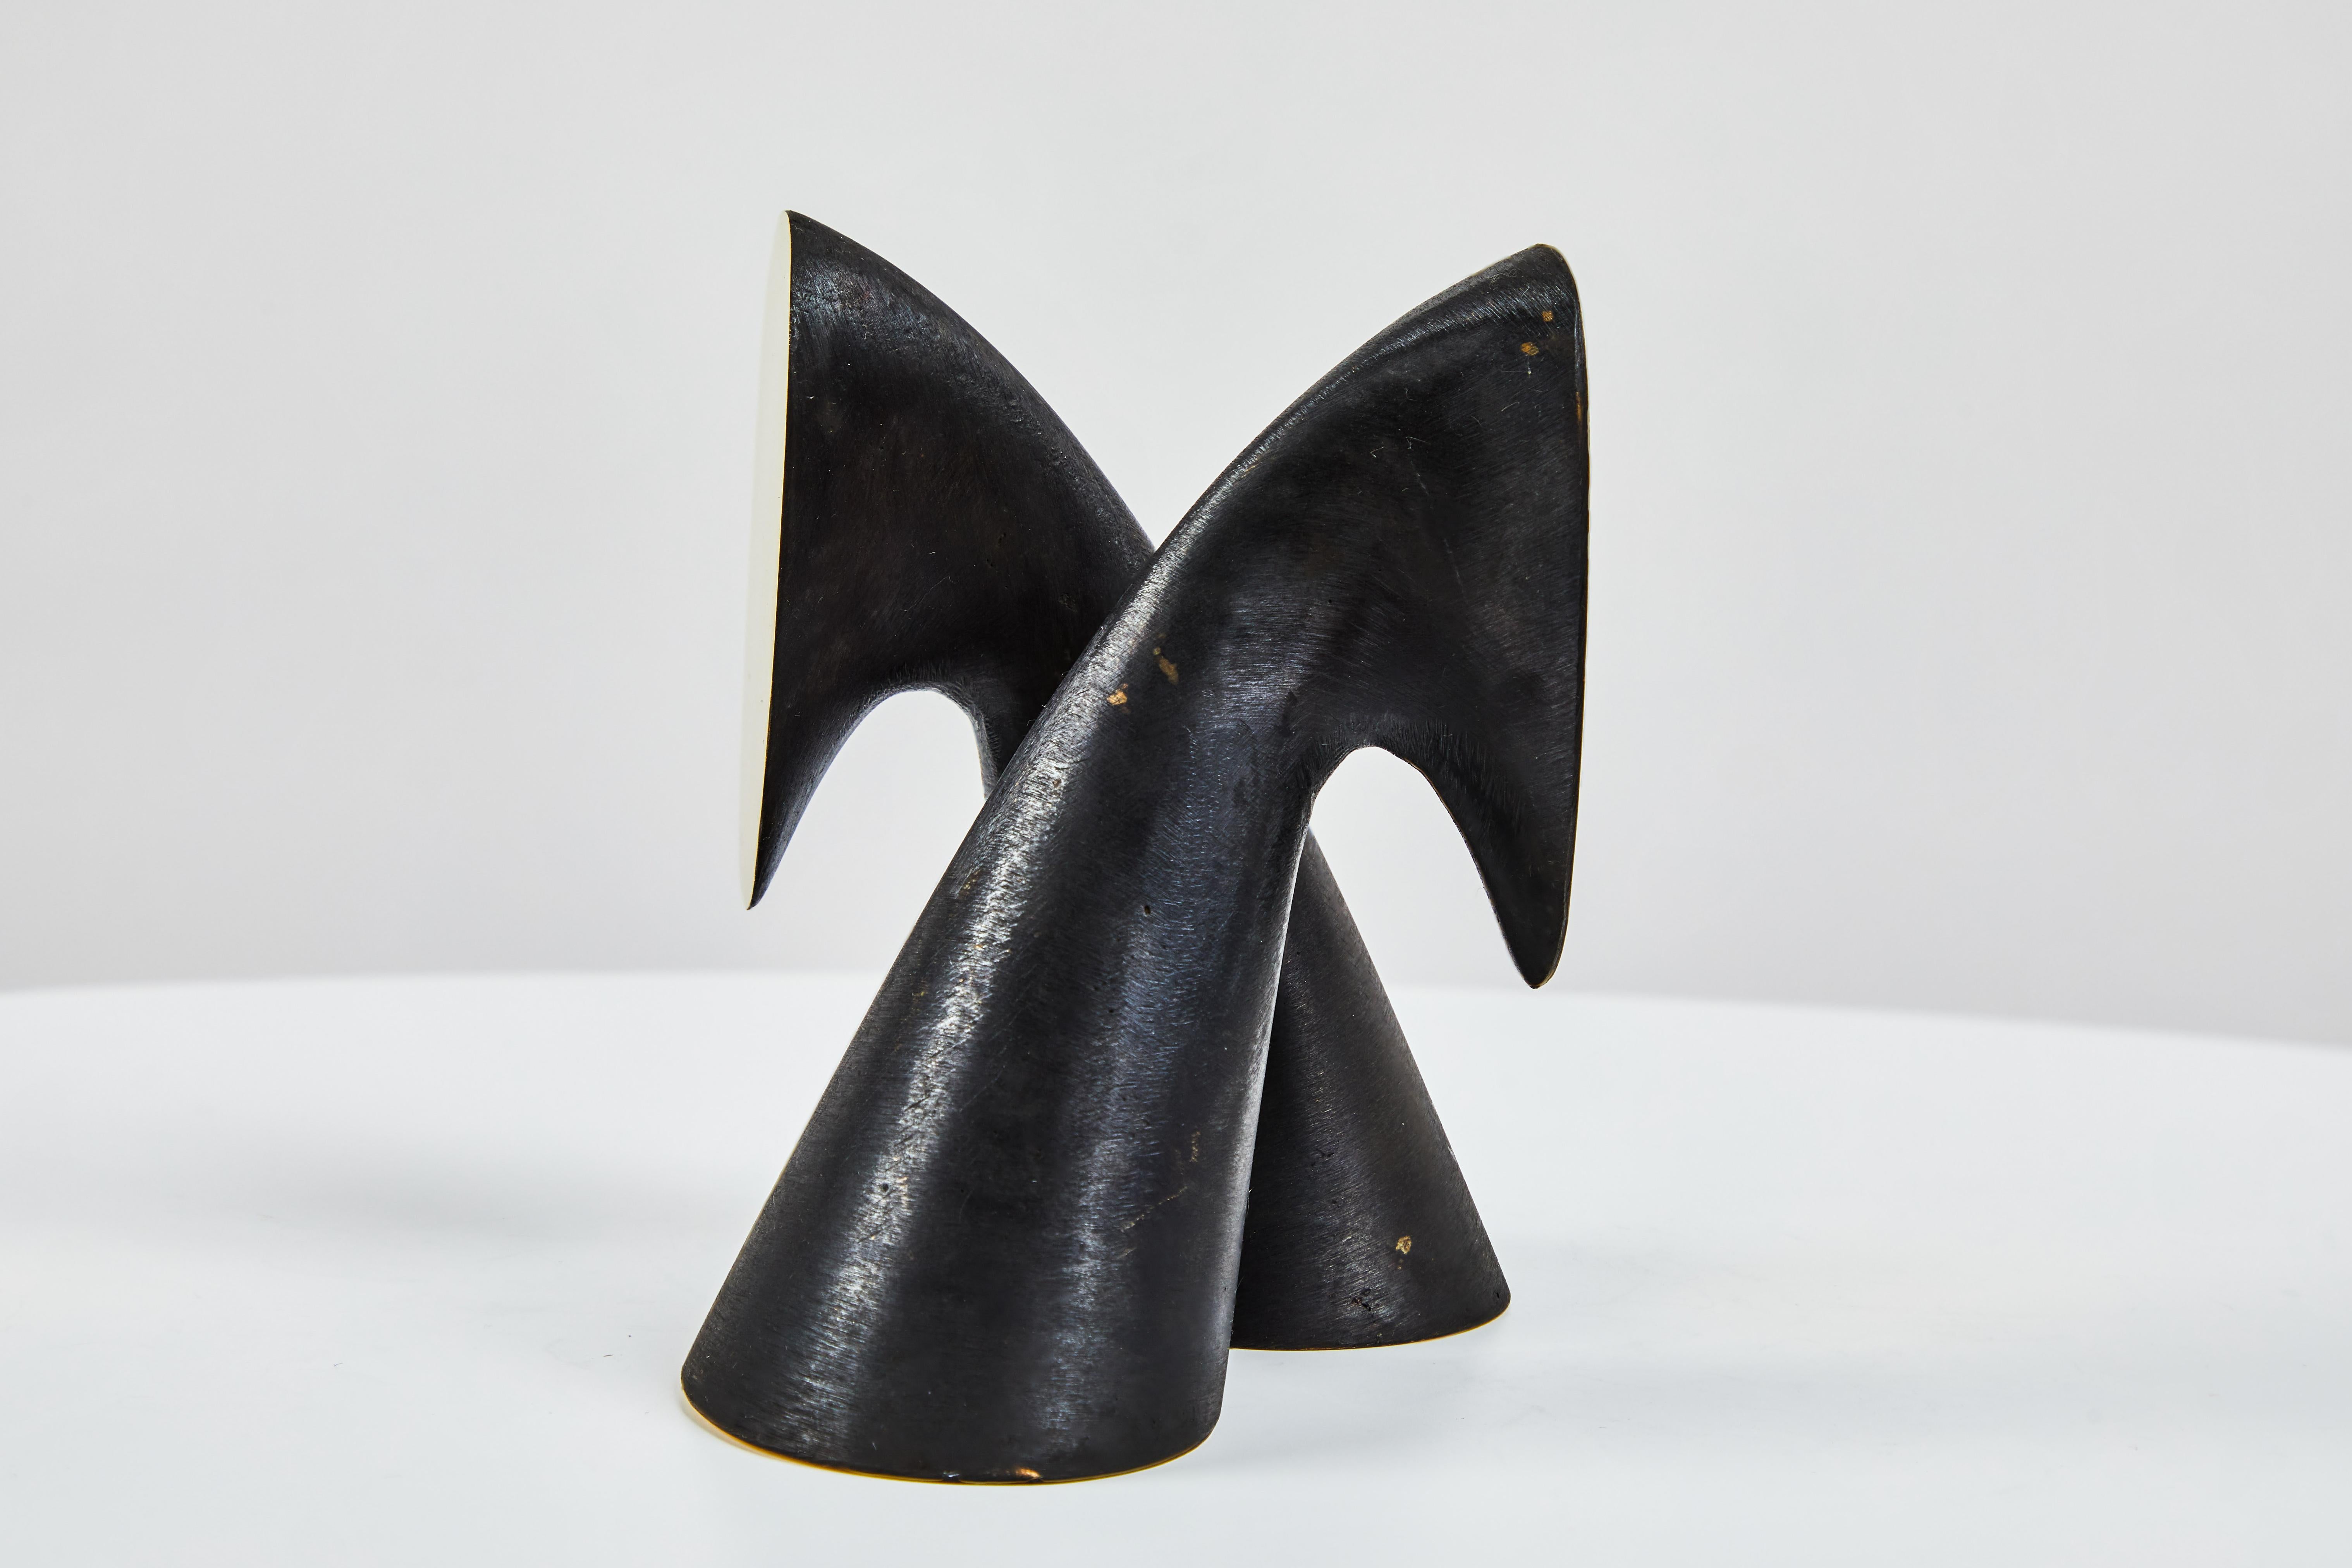 Pair of Carl Auböck model #3654 brass bookends. Designed in the 1950s, this incredibly refined and sculptural pair of bookends are executed in patinated and polished brass. 

Price is for the pair. 2 pairs in stock and ready to ship. Please note